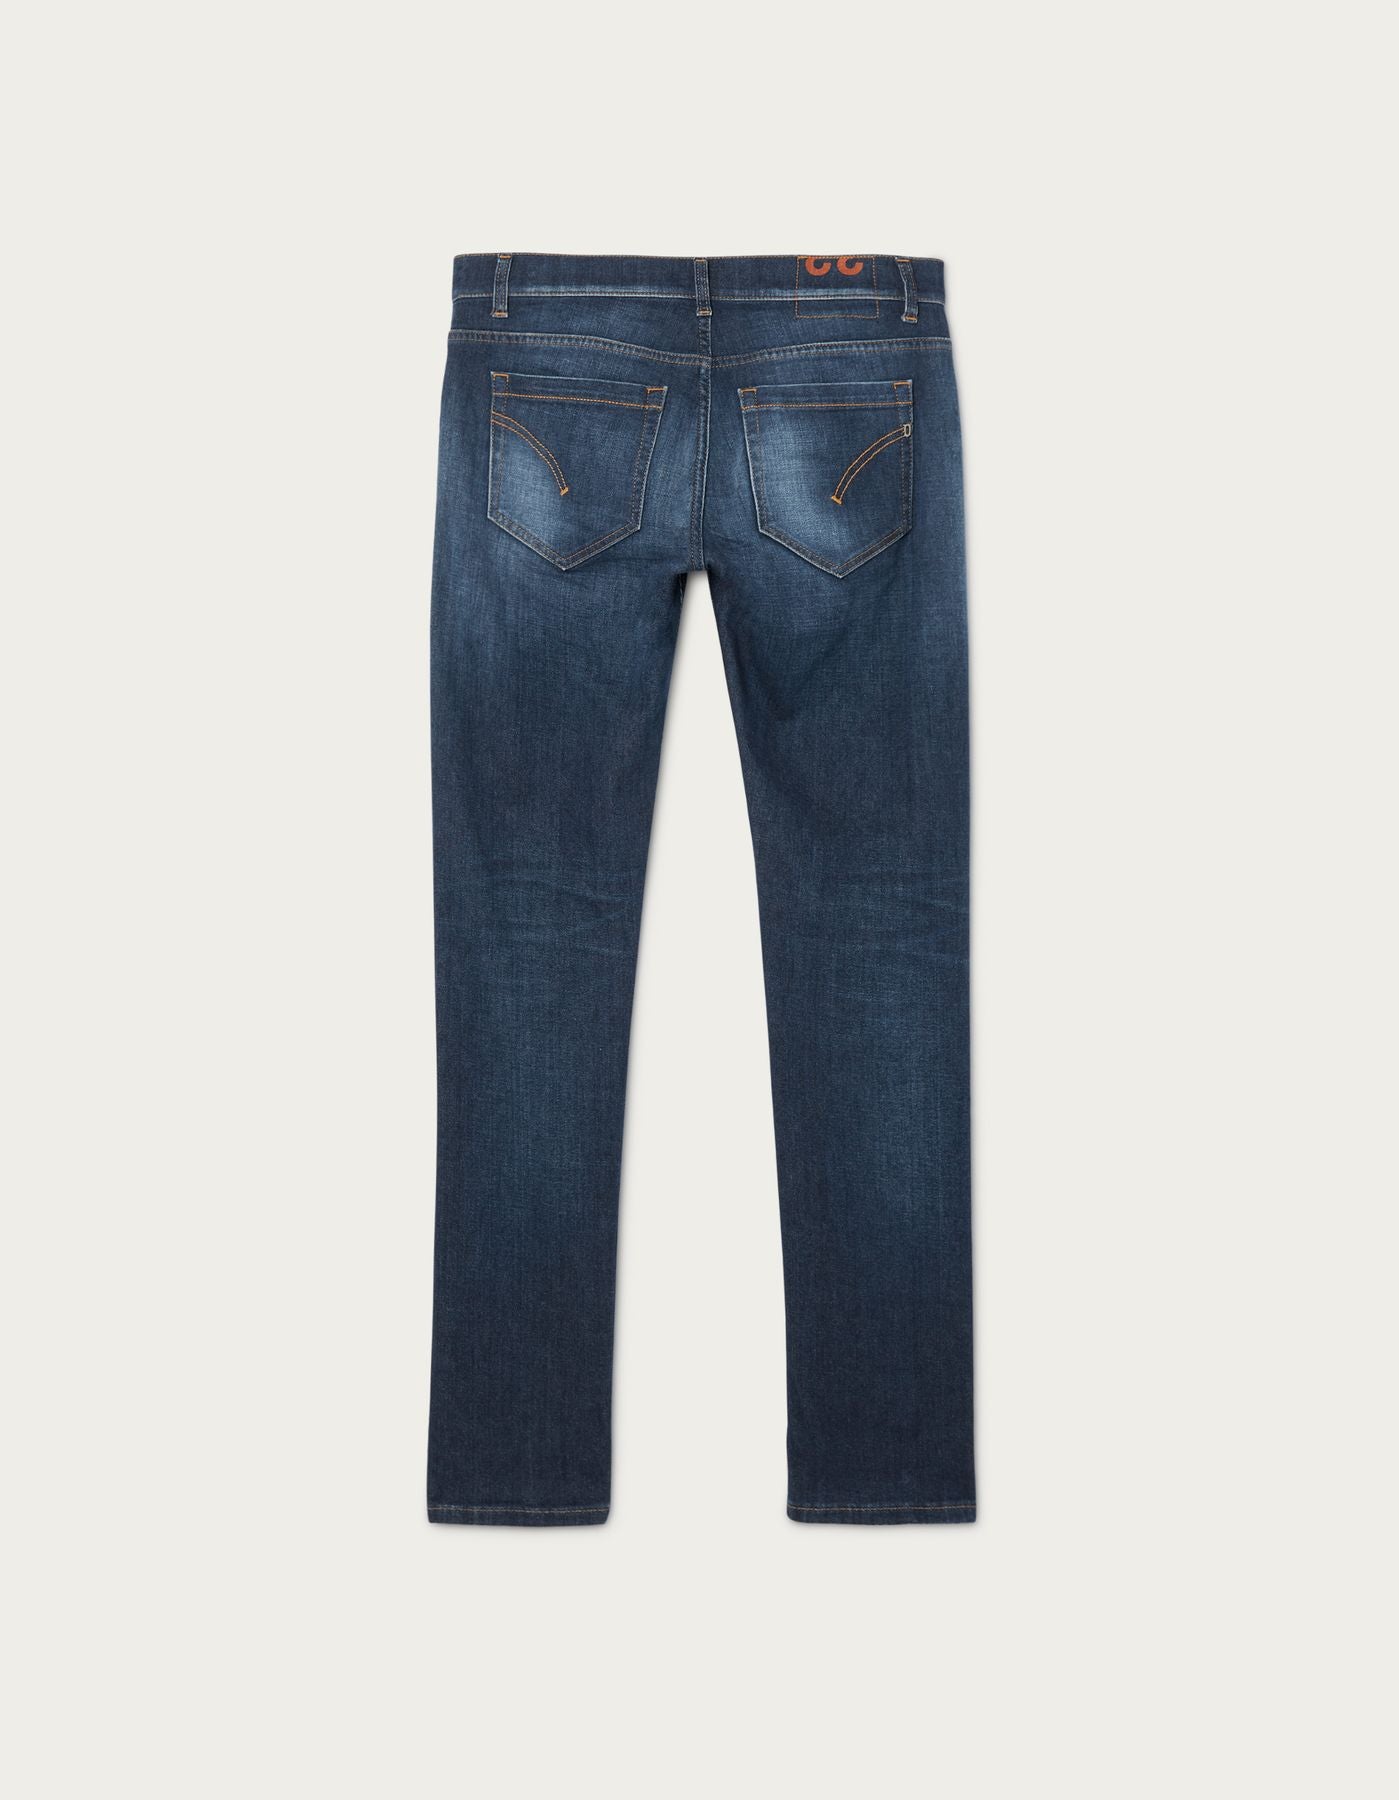 UP232 DS0145 FO4 - JEANS - DONDUP